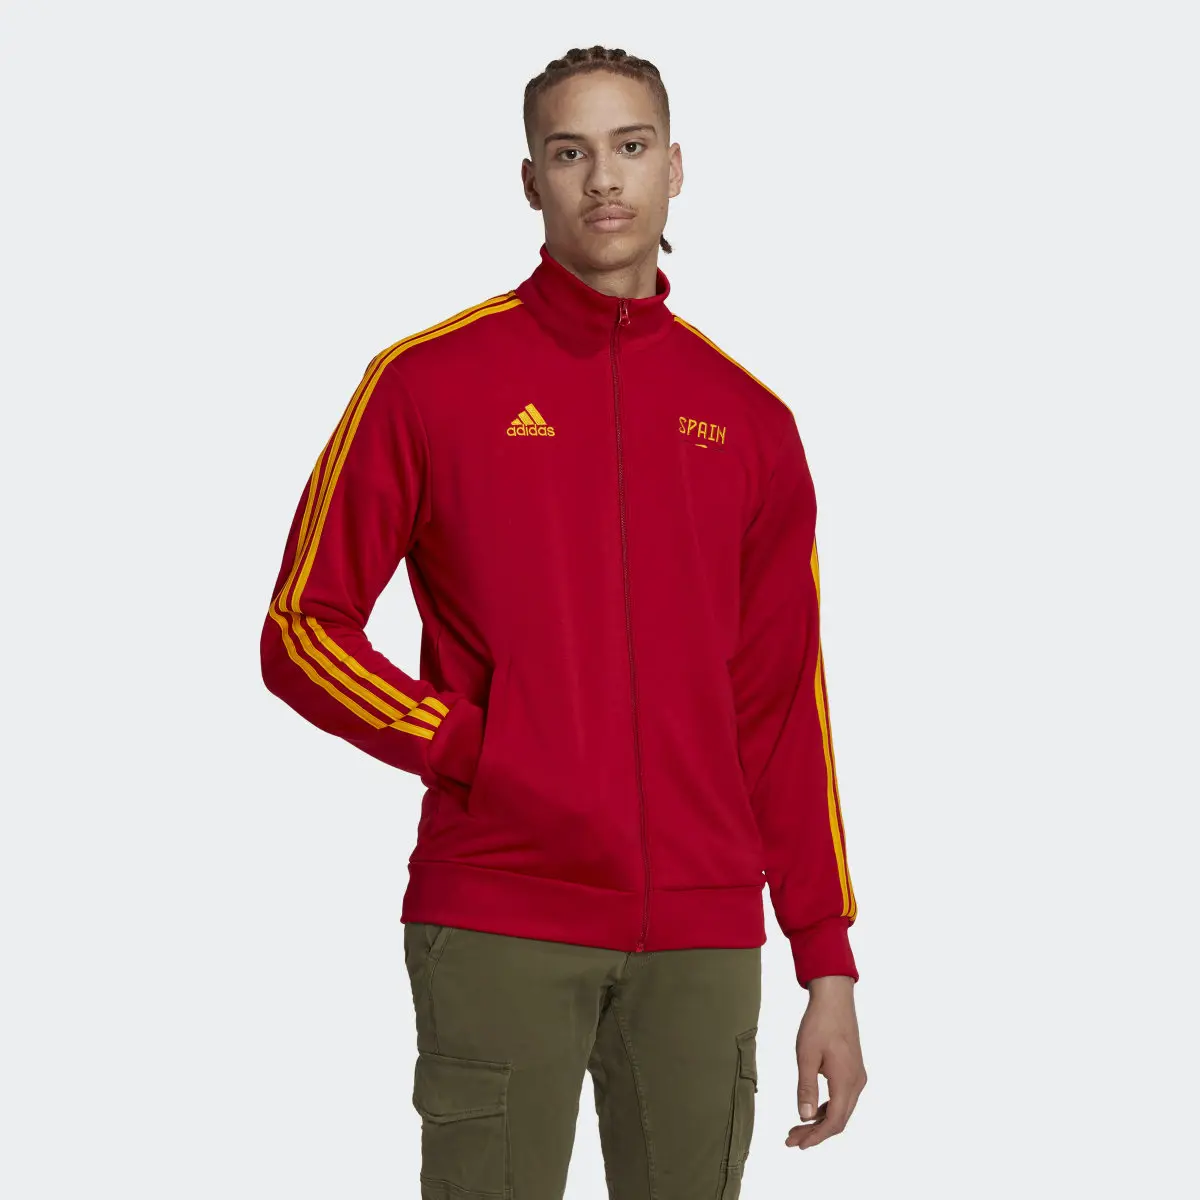 Adidas FIFA World Cup 2022™ Spain Track Top. 2